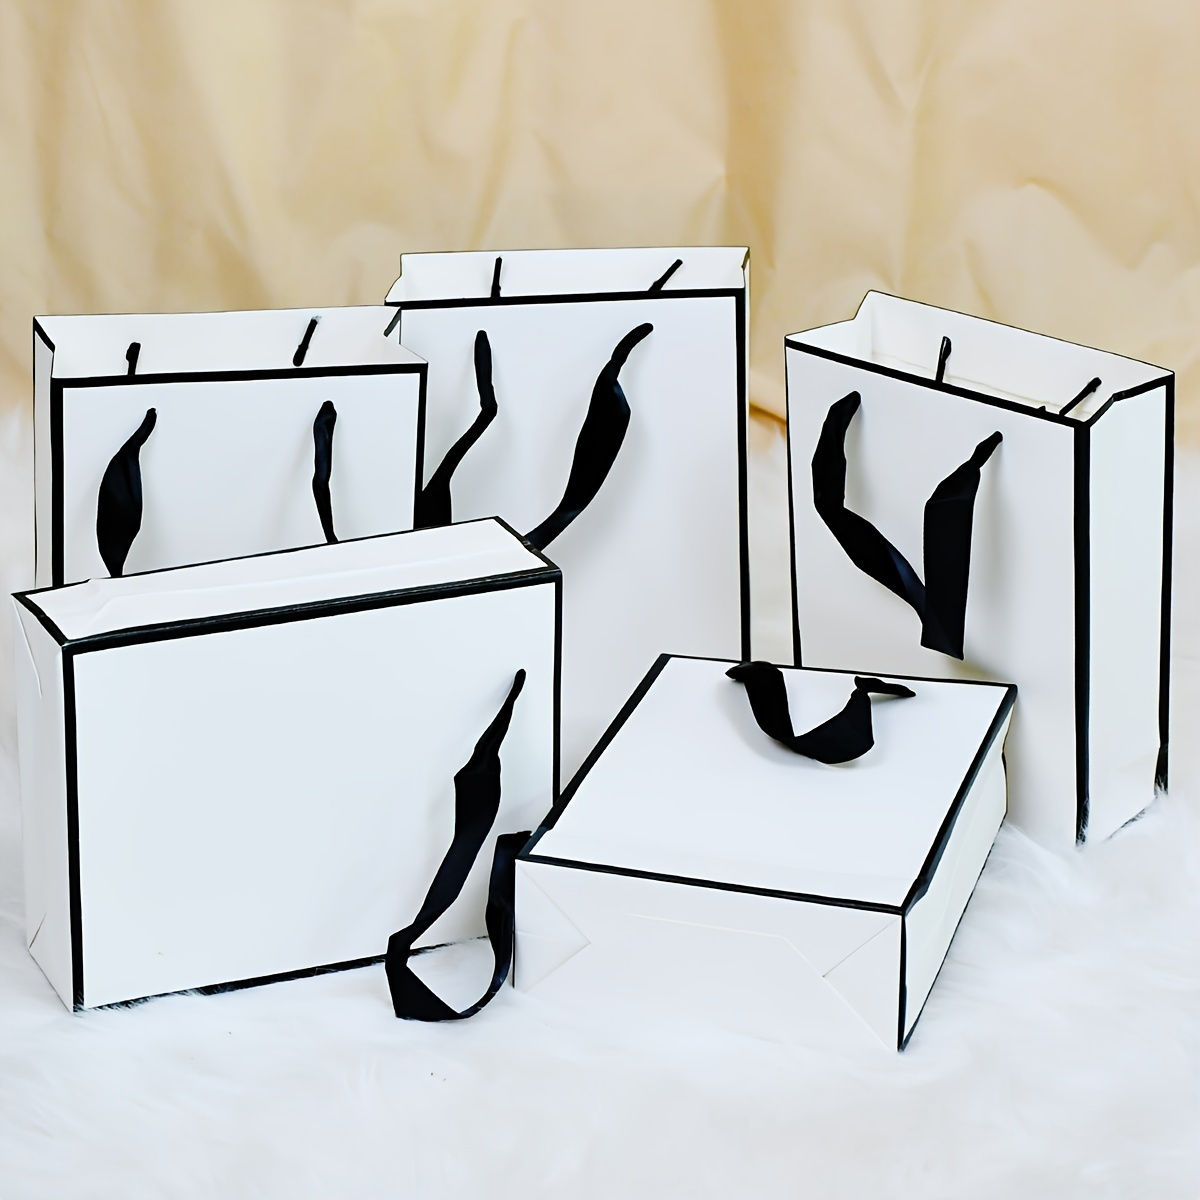 

10pcs, White Kraft Paper Gift Bags With Black Handles, For Wedding, Birthday, Shopping, Party Favors, Boutique - Craft Paper Bags For Small Business Supplies